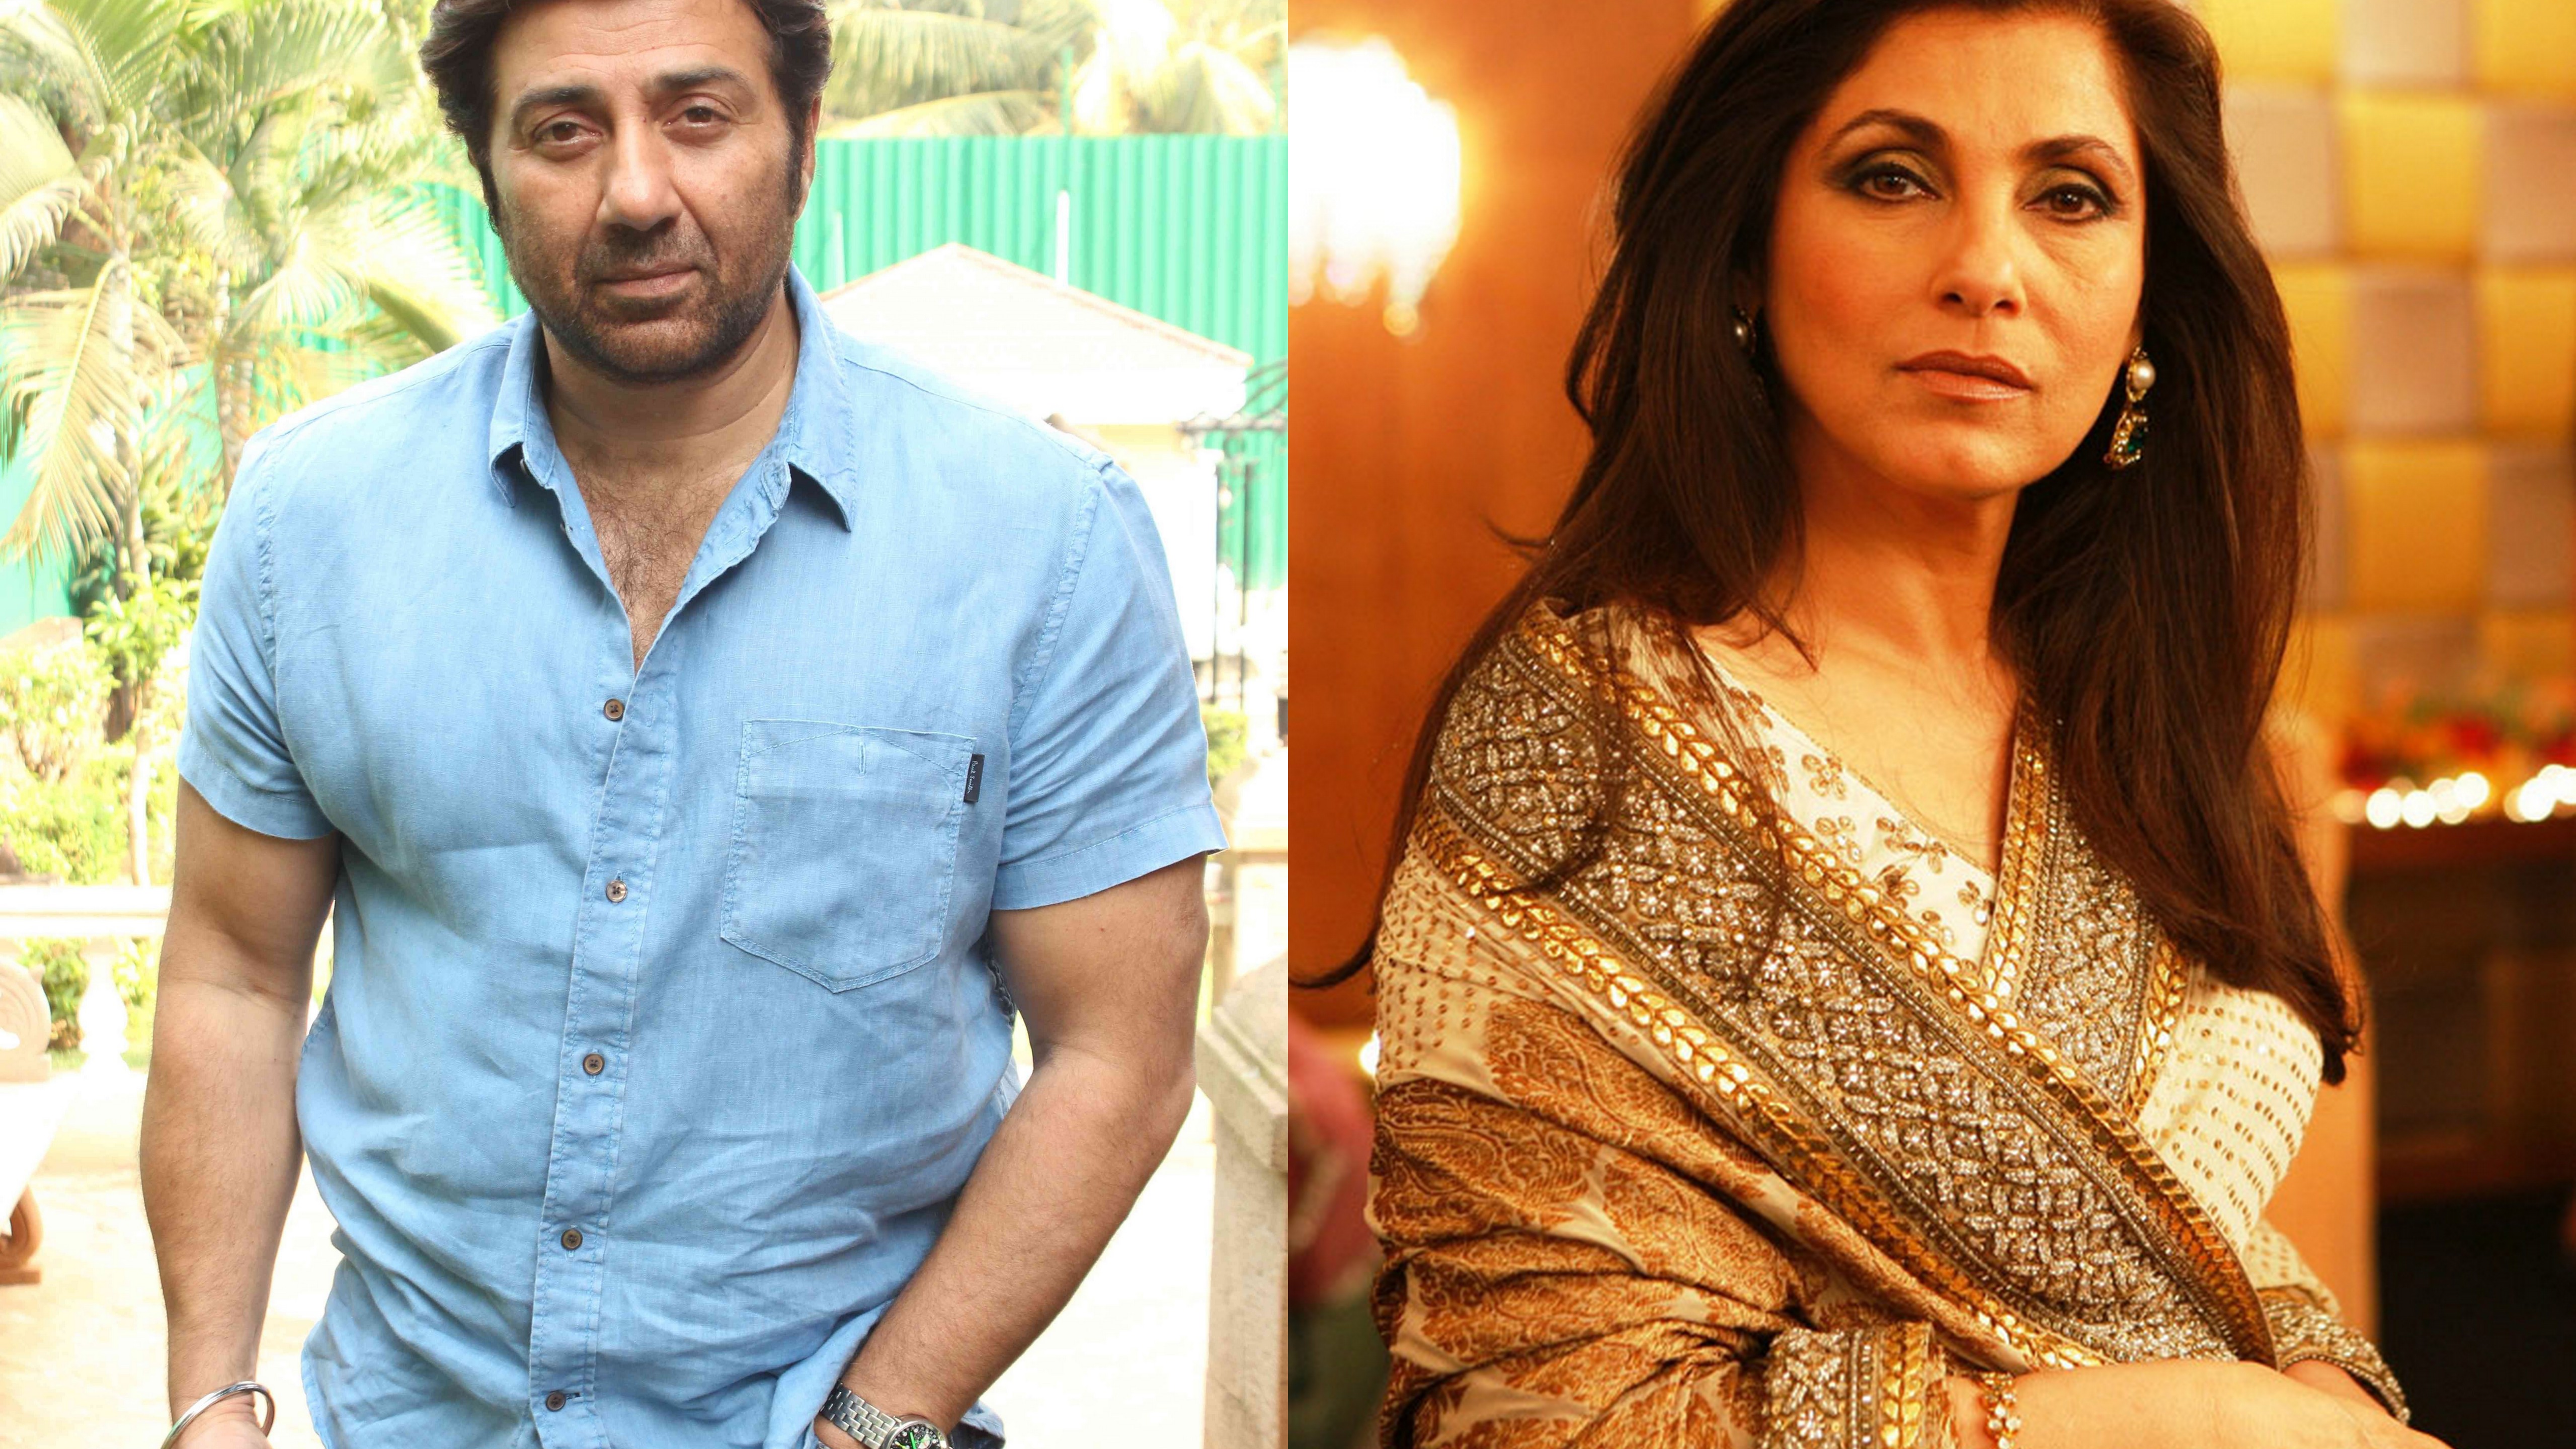 Dimple Kapadia and Sunny Deol